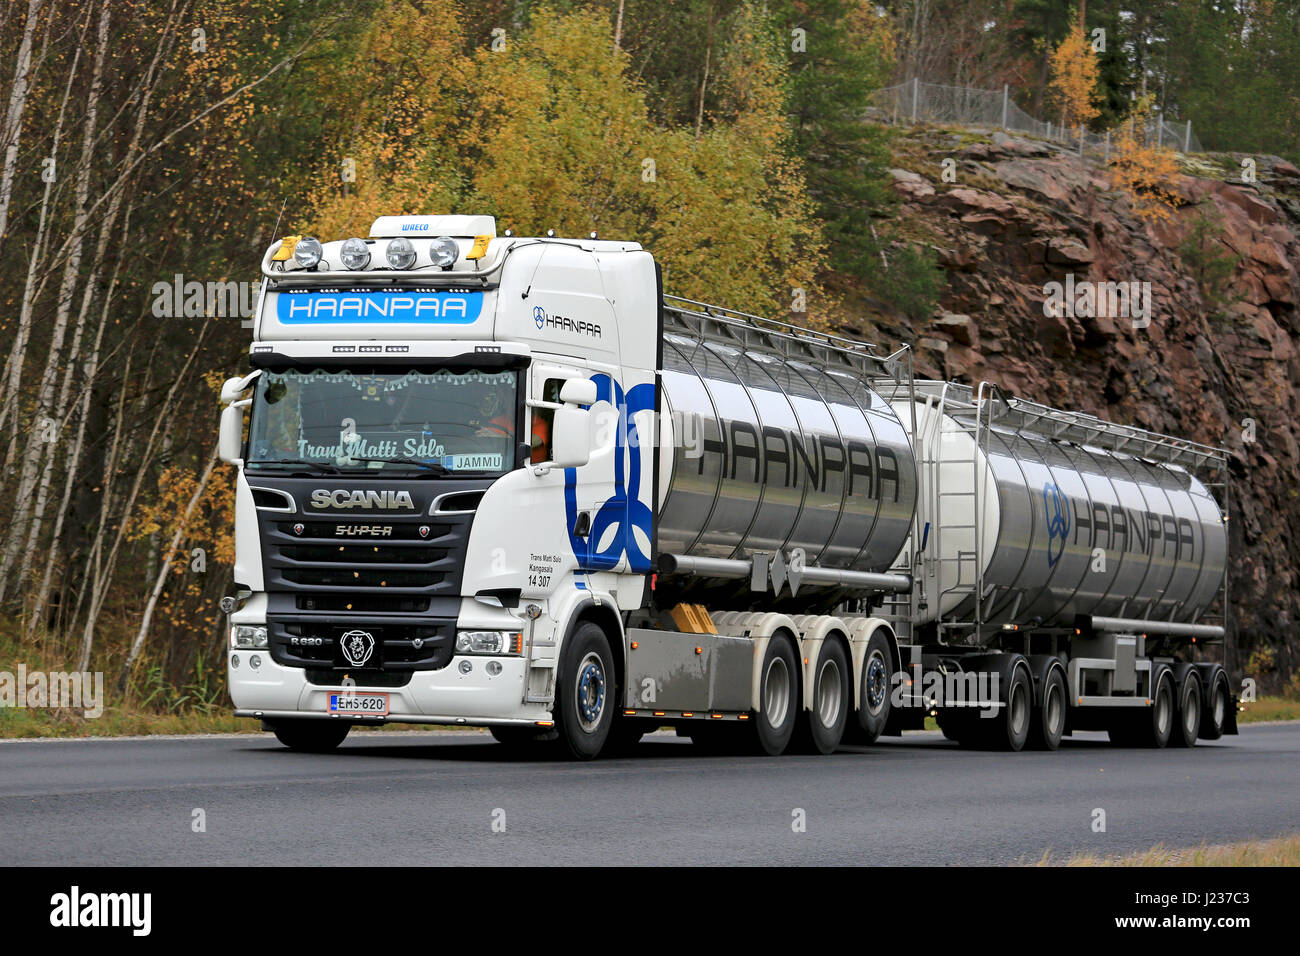 KARJAA, FINLAND - OCTOBER 15, 2016: White super Scania R620 tank truck of Trans Matti Salo for Haanpaa moves along highway in autumn in South of Finla Stock Photo